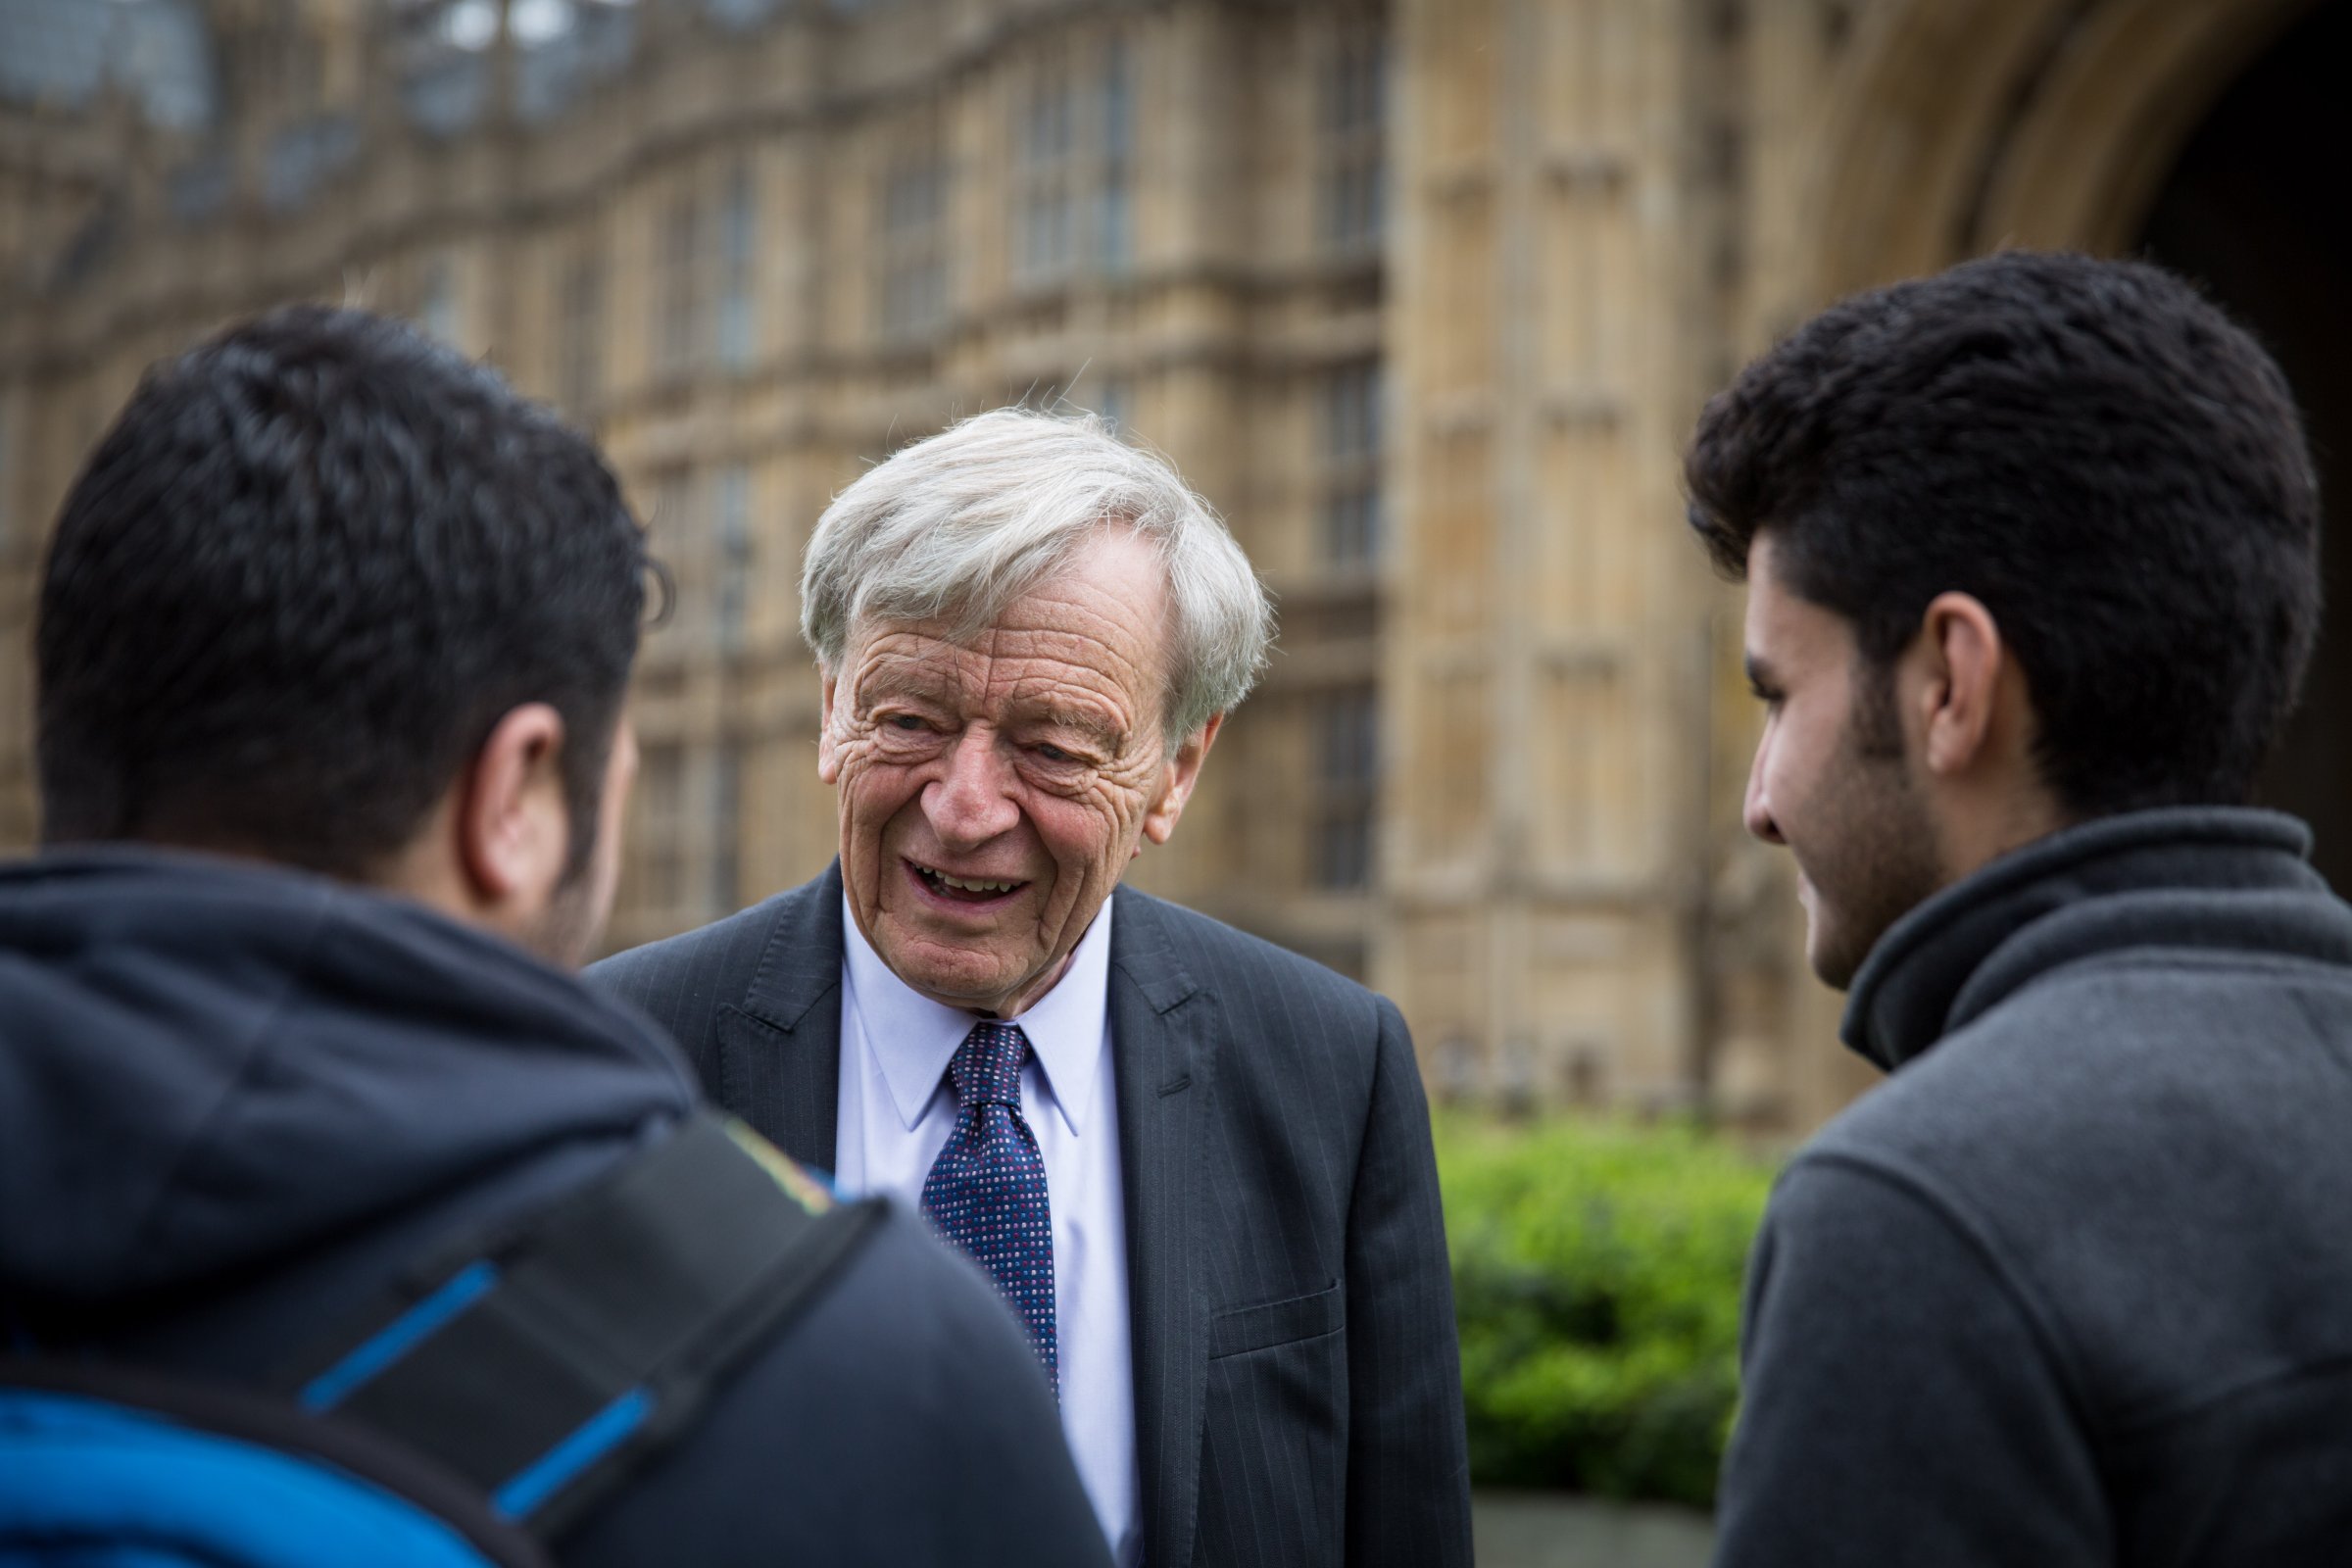 Lord Alf Dubs speaks to two child refugees from Syria on College Green on April 25, 2016 in London, England.